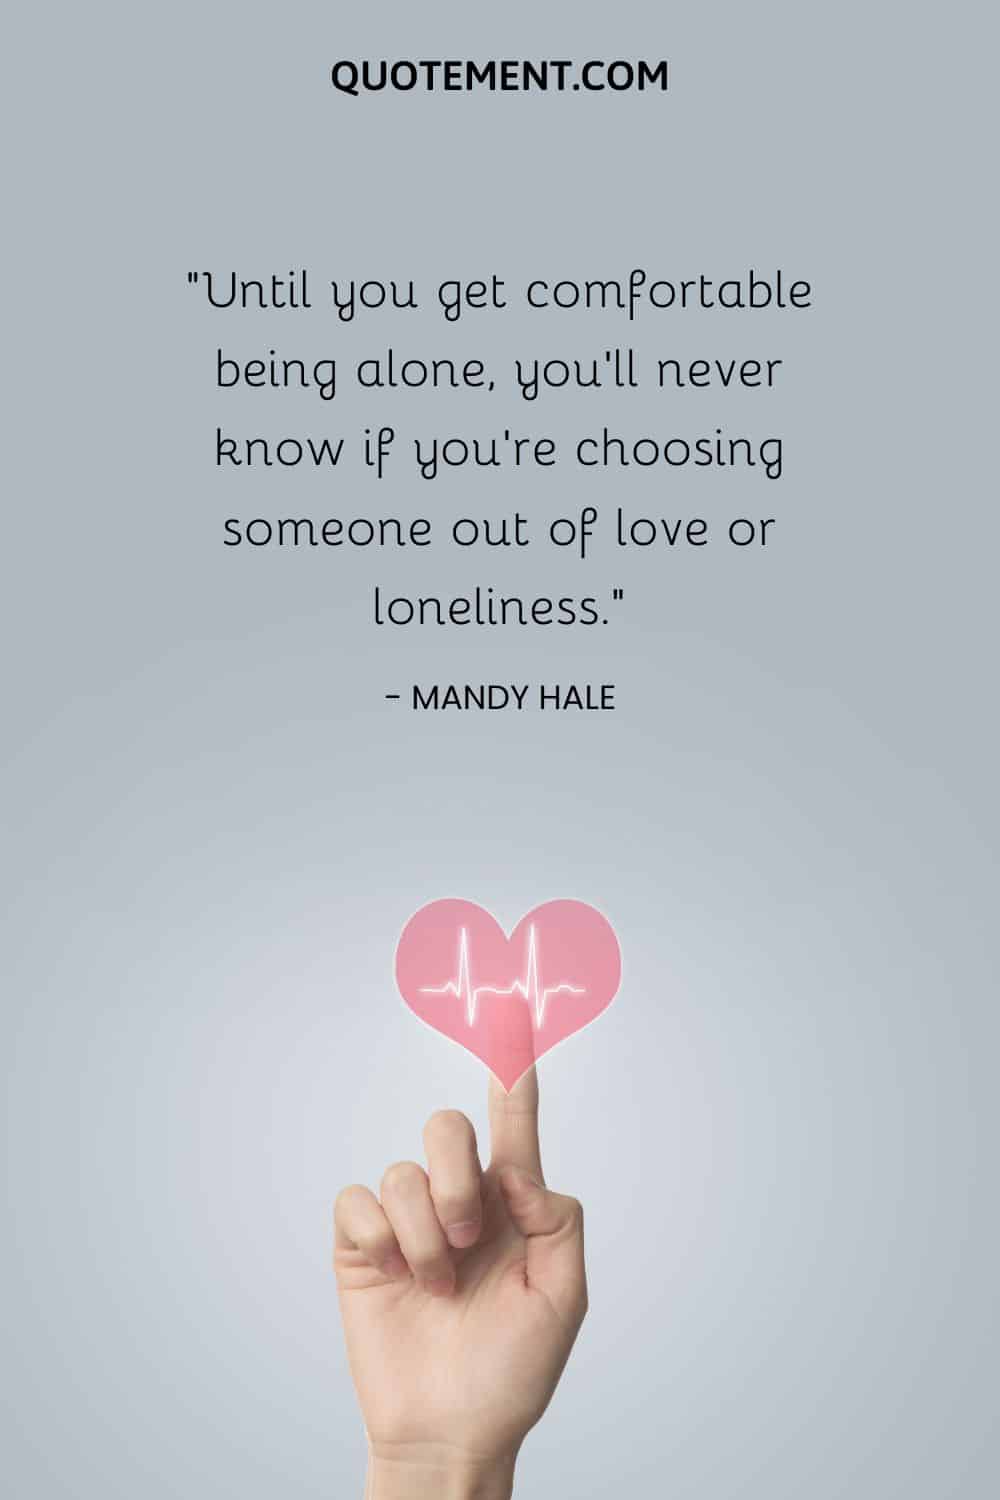 Until you get comfortable being alone, you’ll never know if you’re choosing someone out of love or loneliness